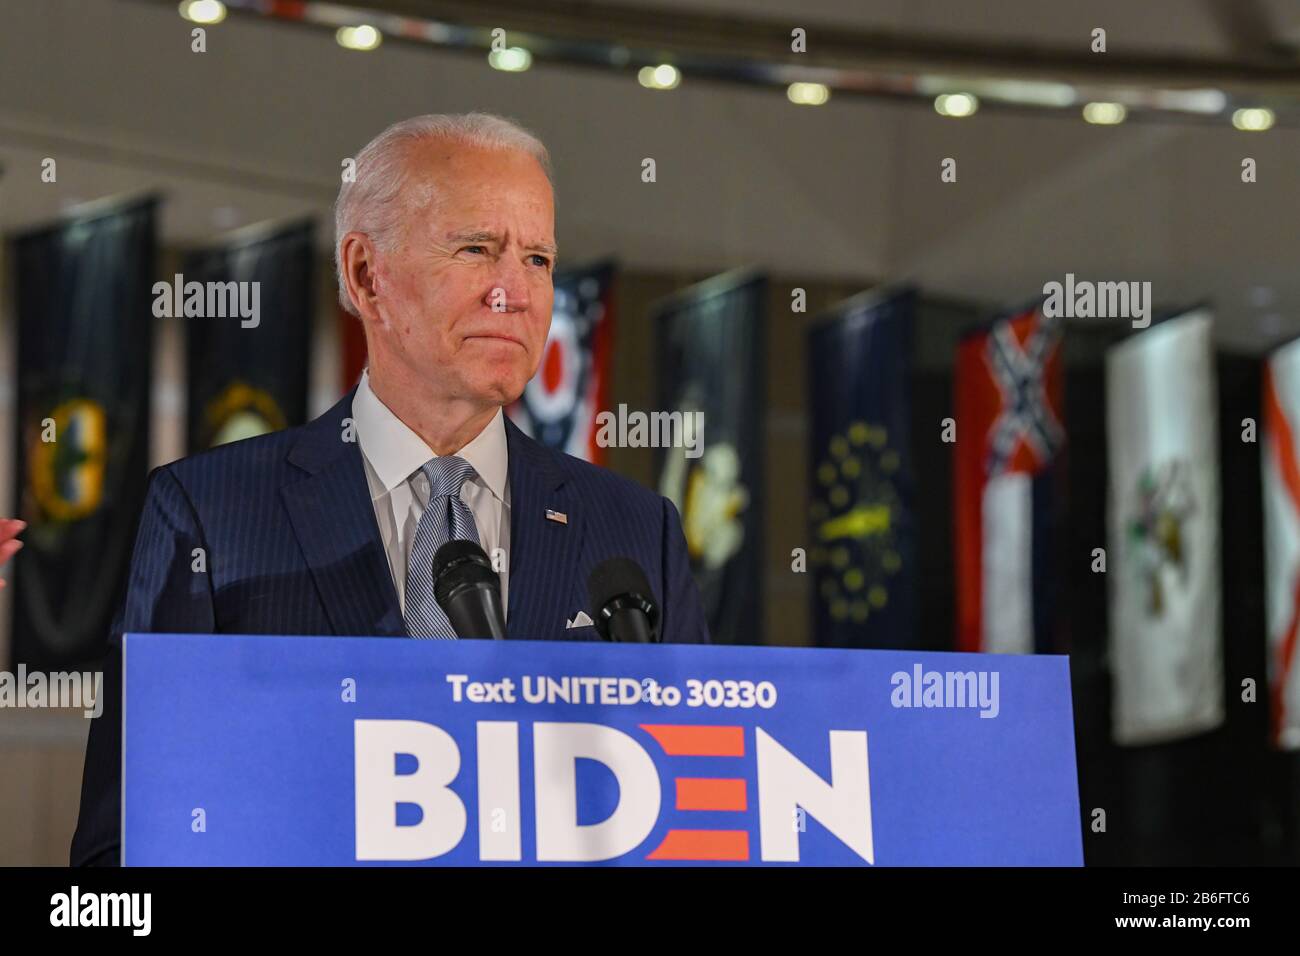 Joe Biden, U.S. President as the United States democratic presidential candidate and former Vice President of the United States of America speaking at the National Convention Center in Philadelphia PA during primary voting Stock Photo